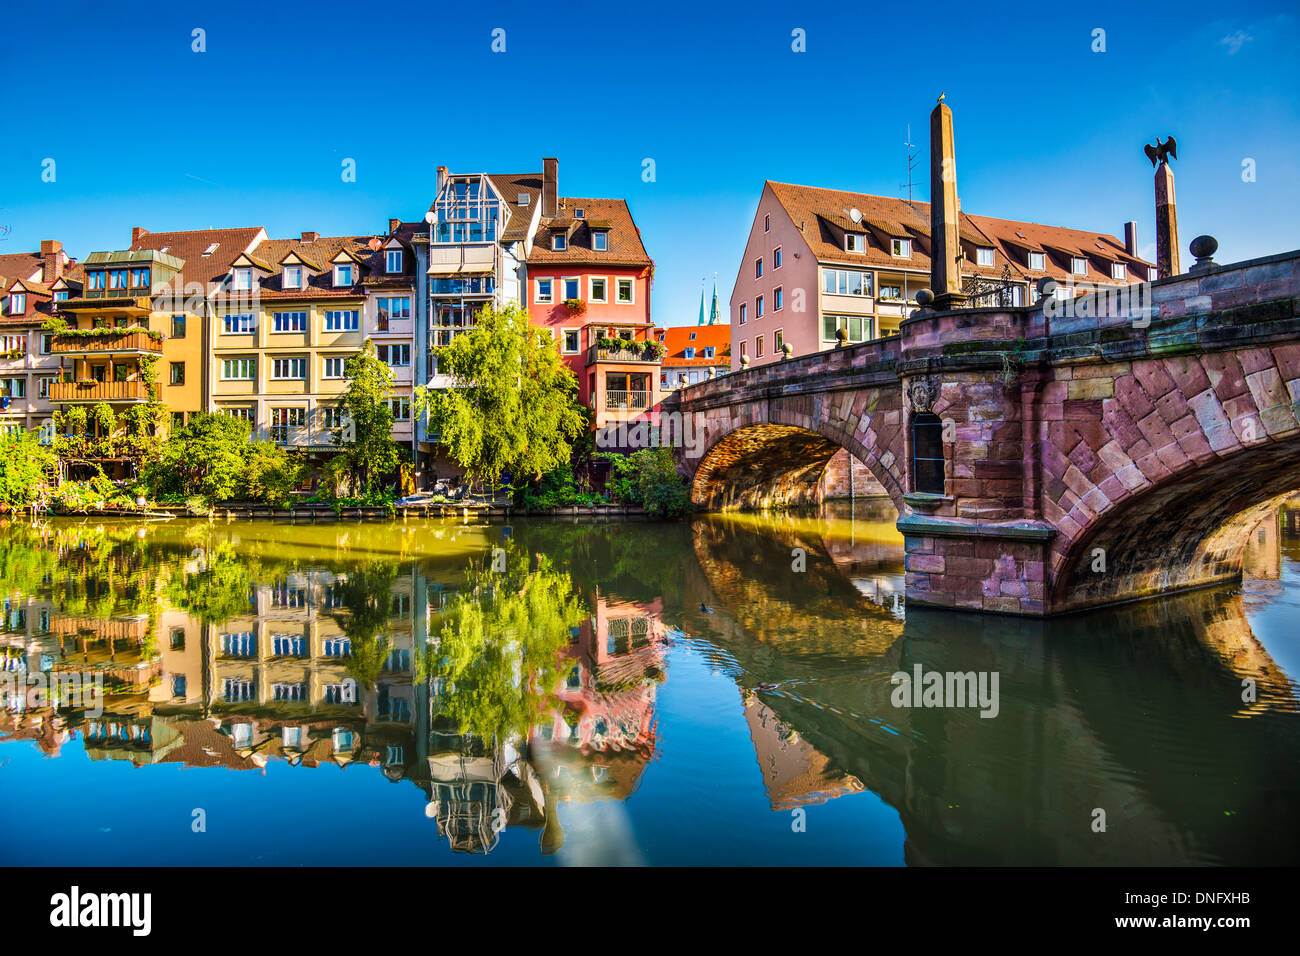 Nuremberg, Germany old town on the Pegnitz River. Stock Photo